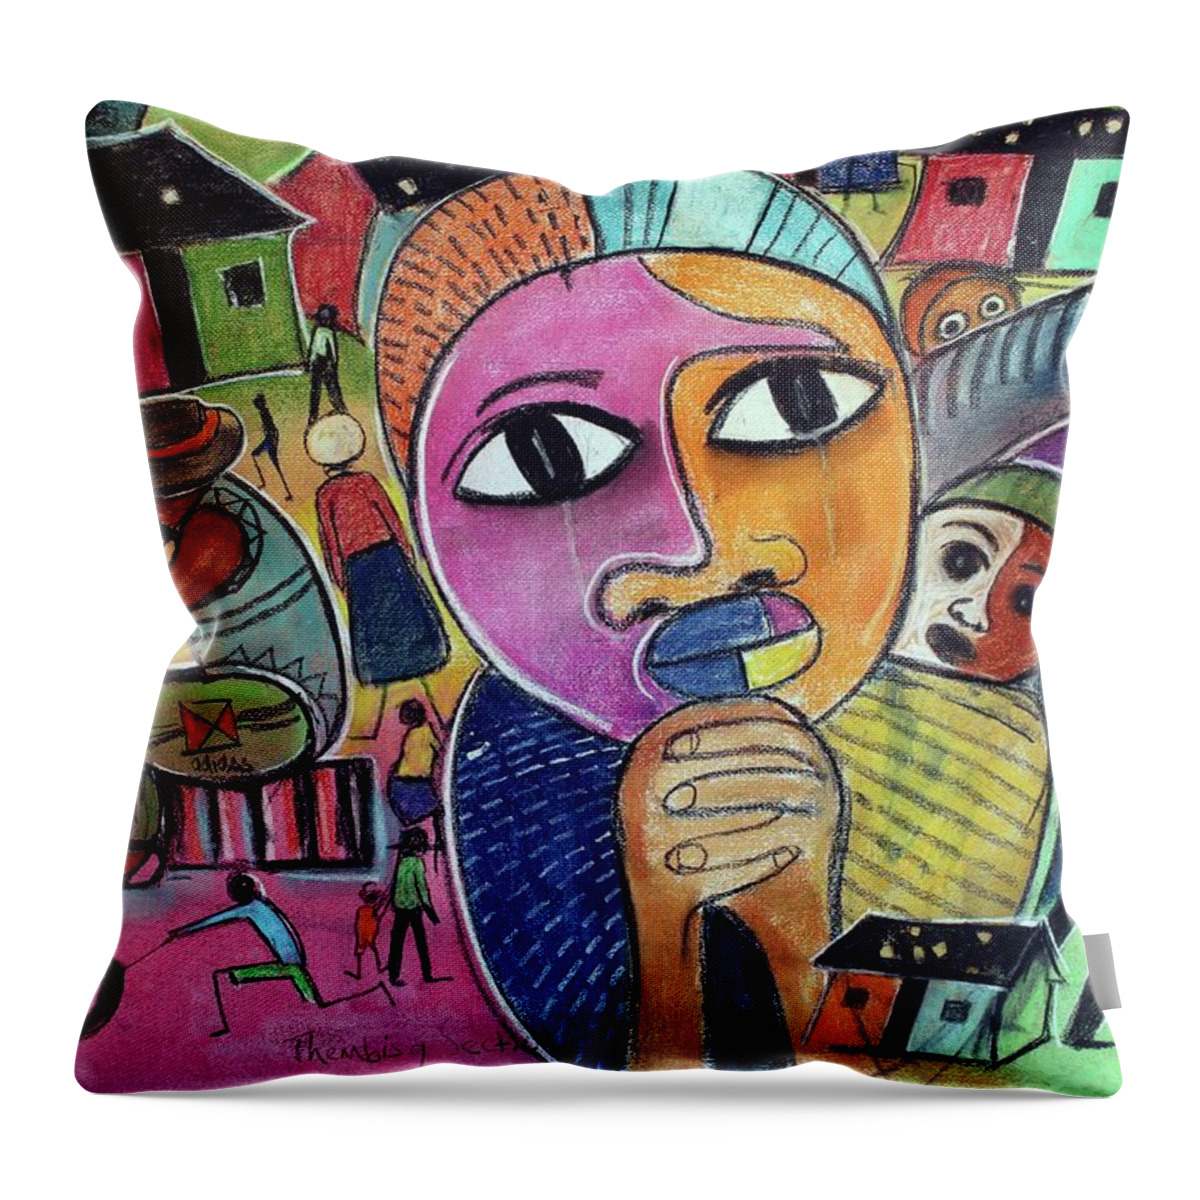 African Art Throw Pillow featuring the painting Thembisa by Eli Kobeli 1932-1999